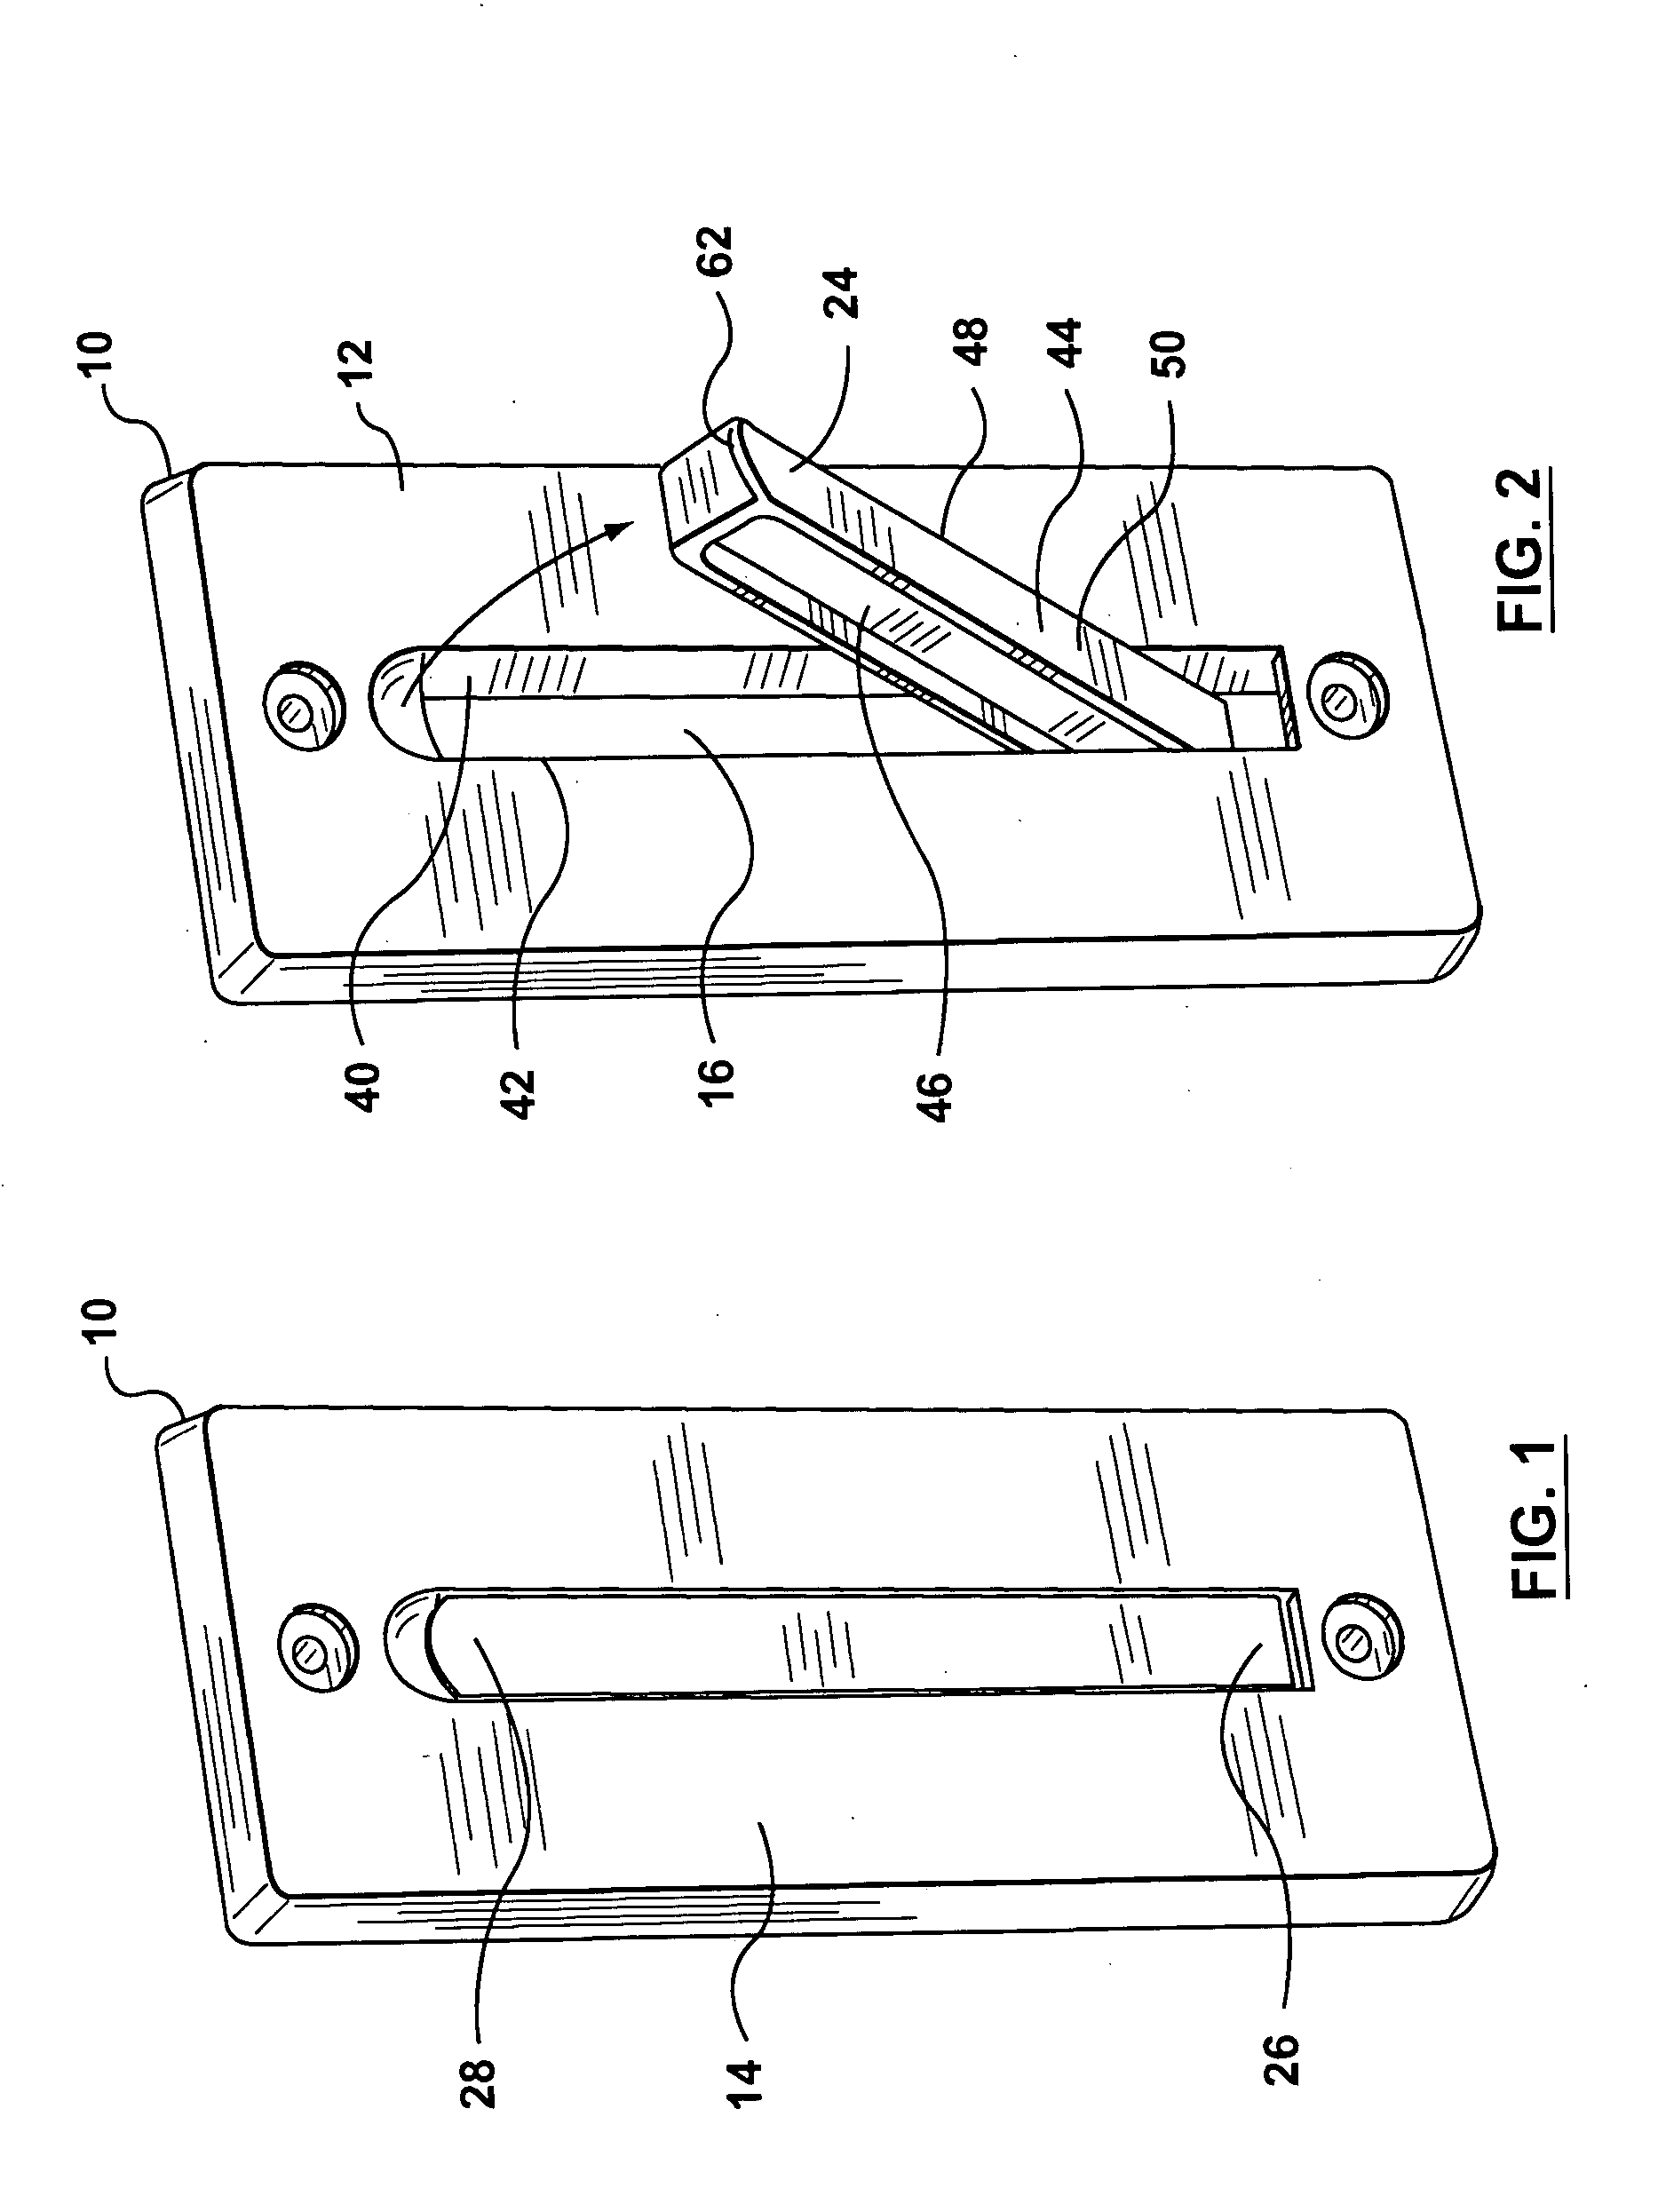 Retractable hook assembly for mounting on a surface